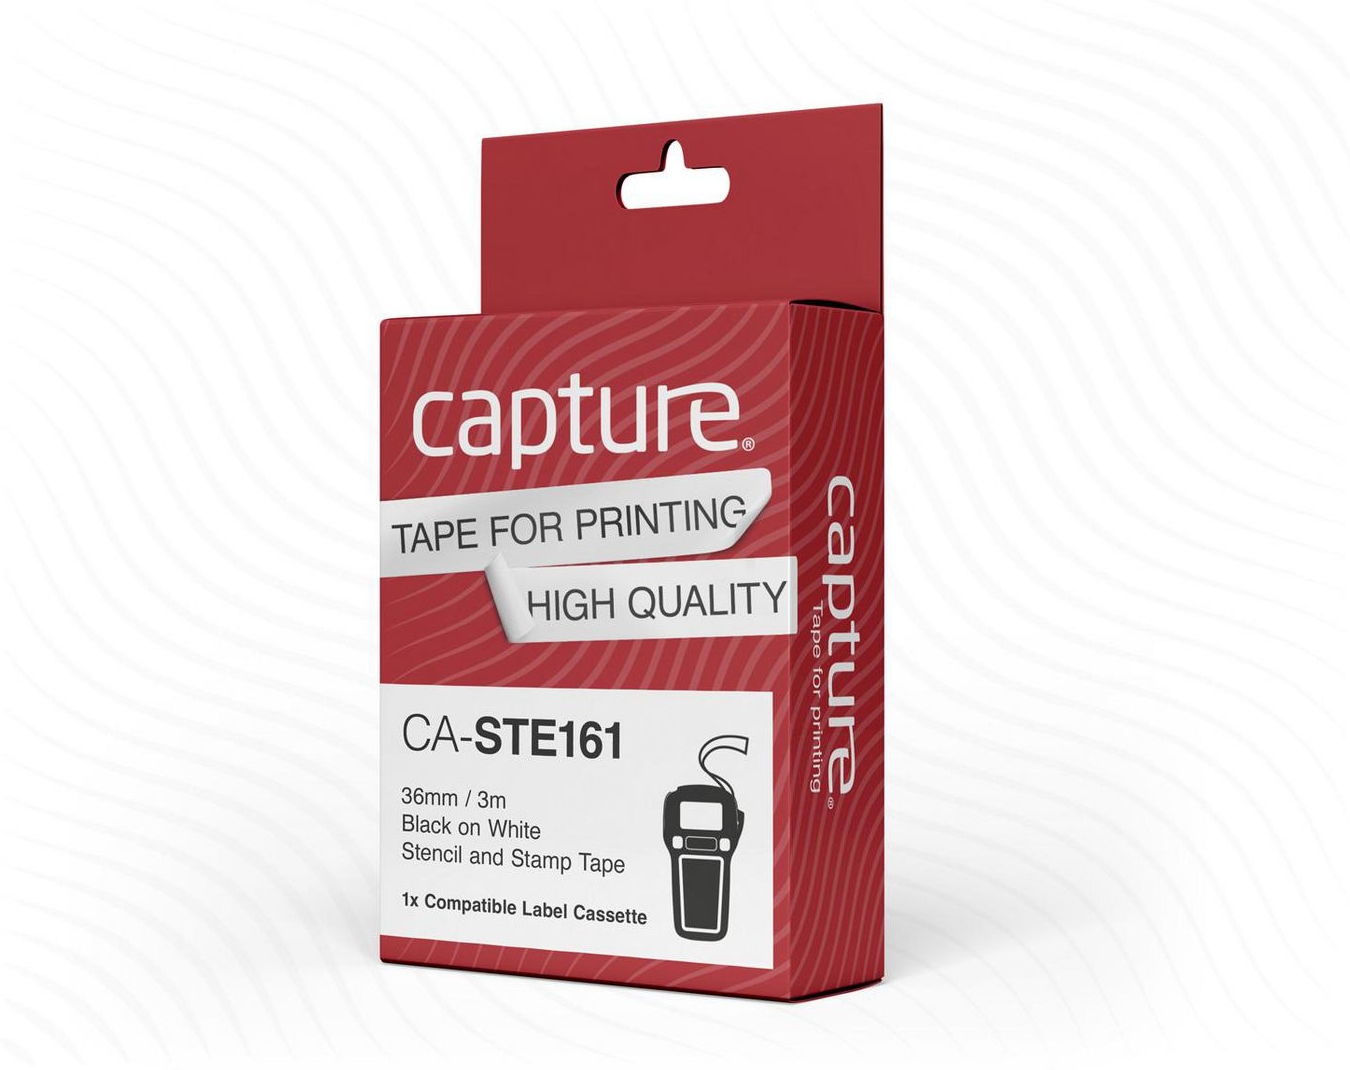 Capture Stencil and Stamp Tape